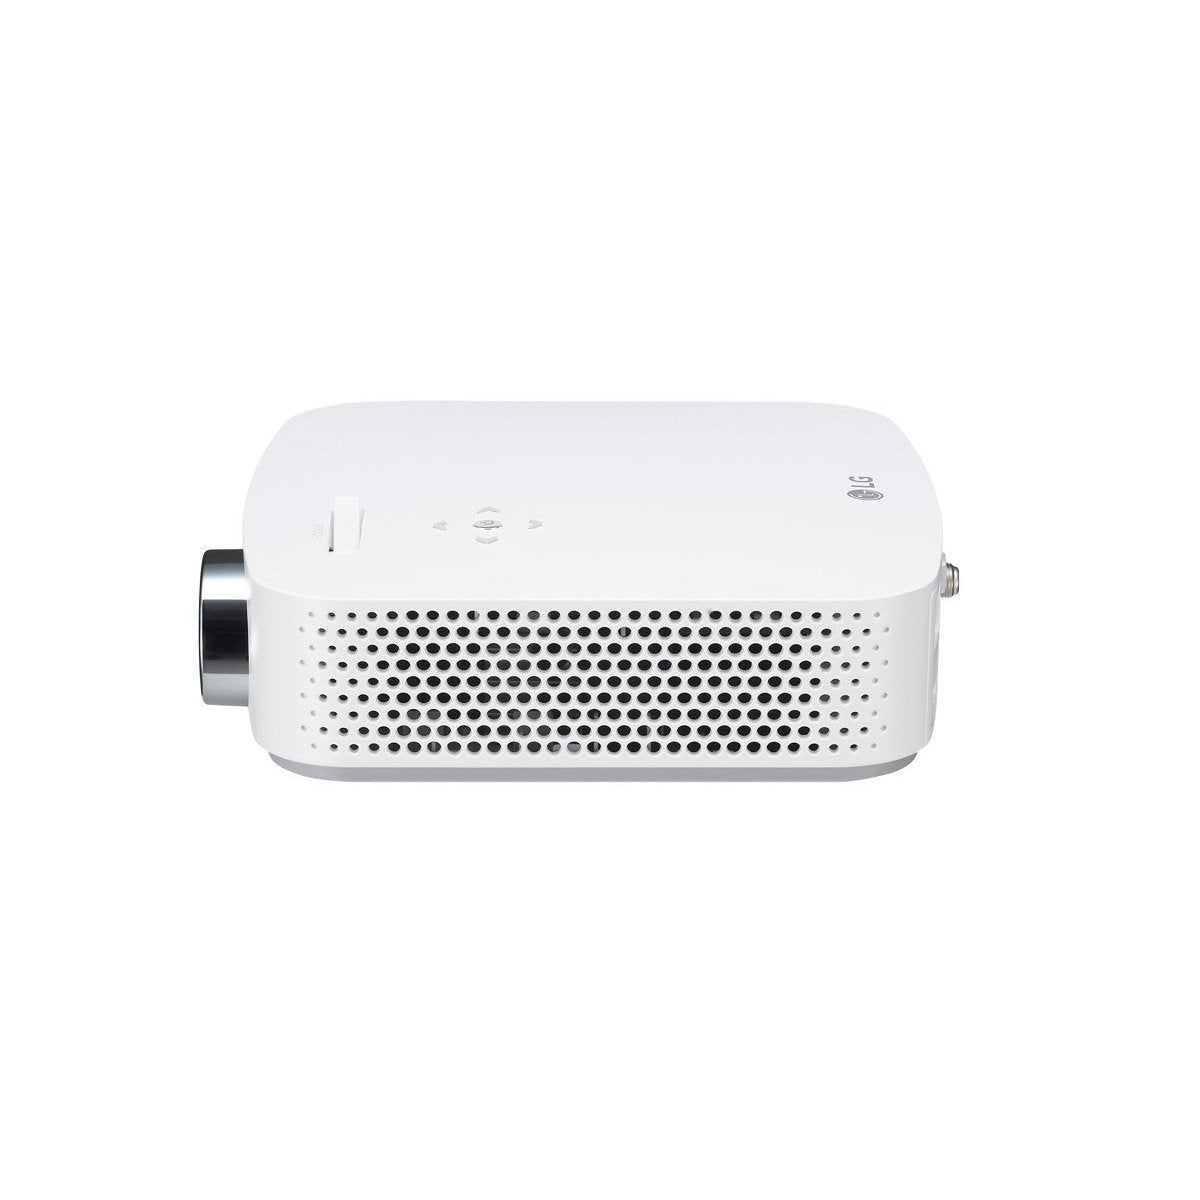 LG PF50KA Full HD LED Smart Home Theater Projector with Built-In Battery